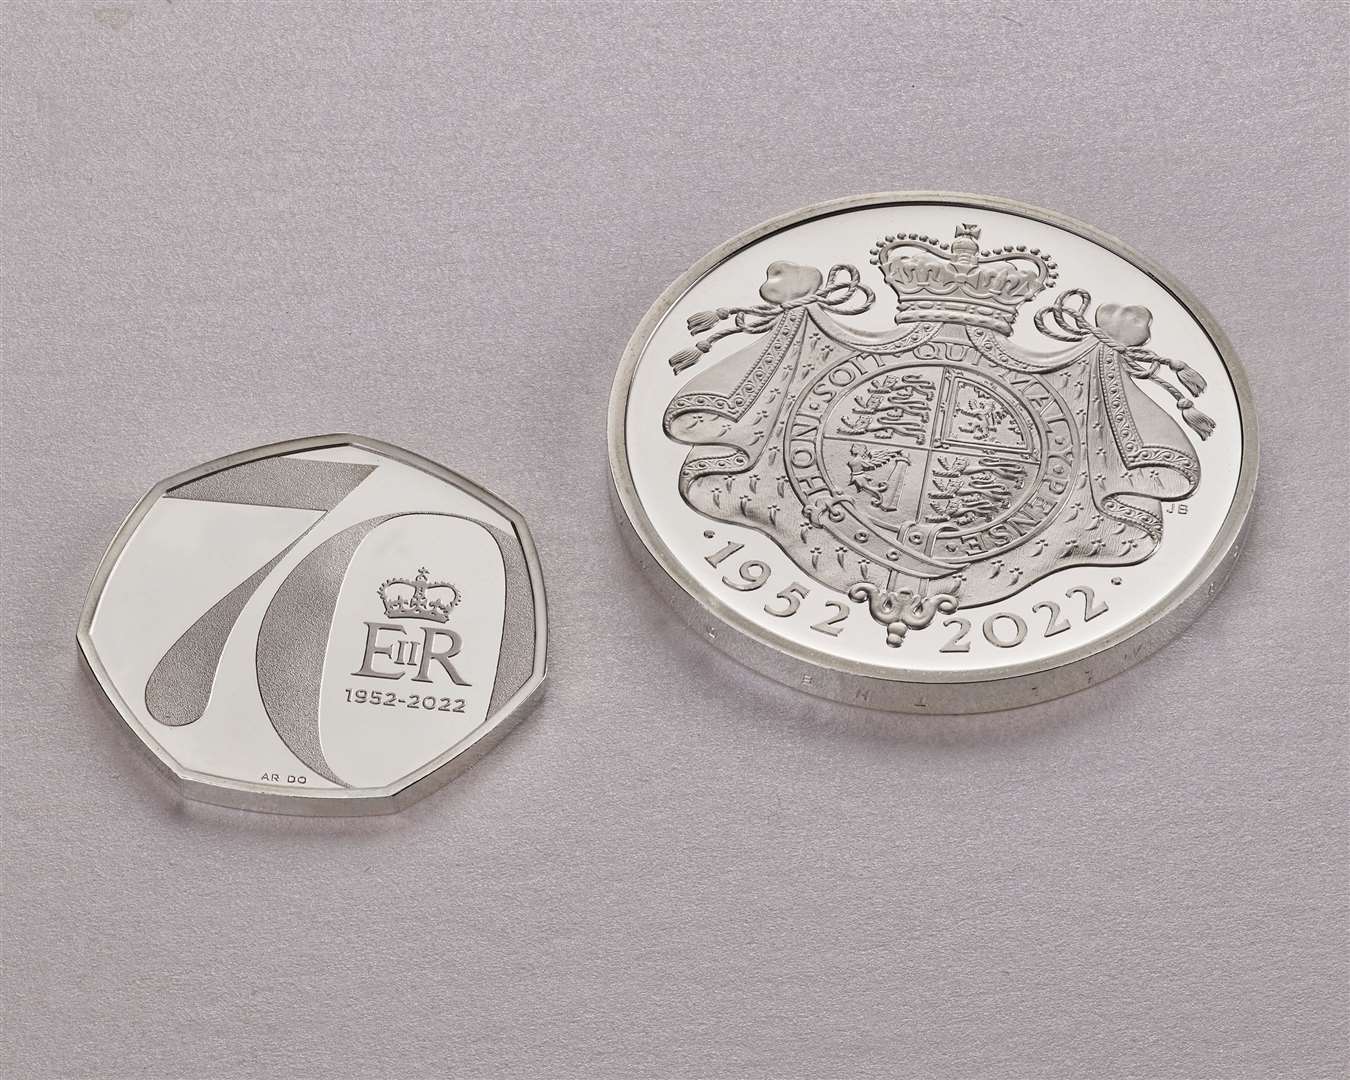 This year's Platinum Jubilee of the Queen is being marked by The Royal Mint with new coins